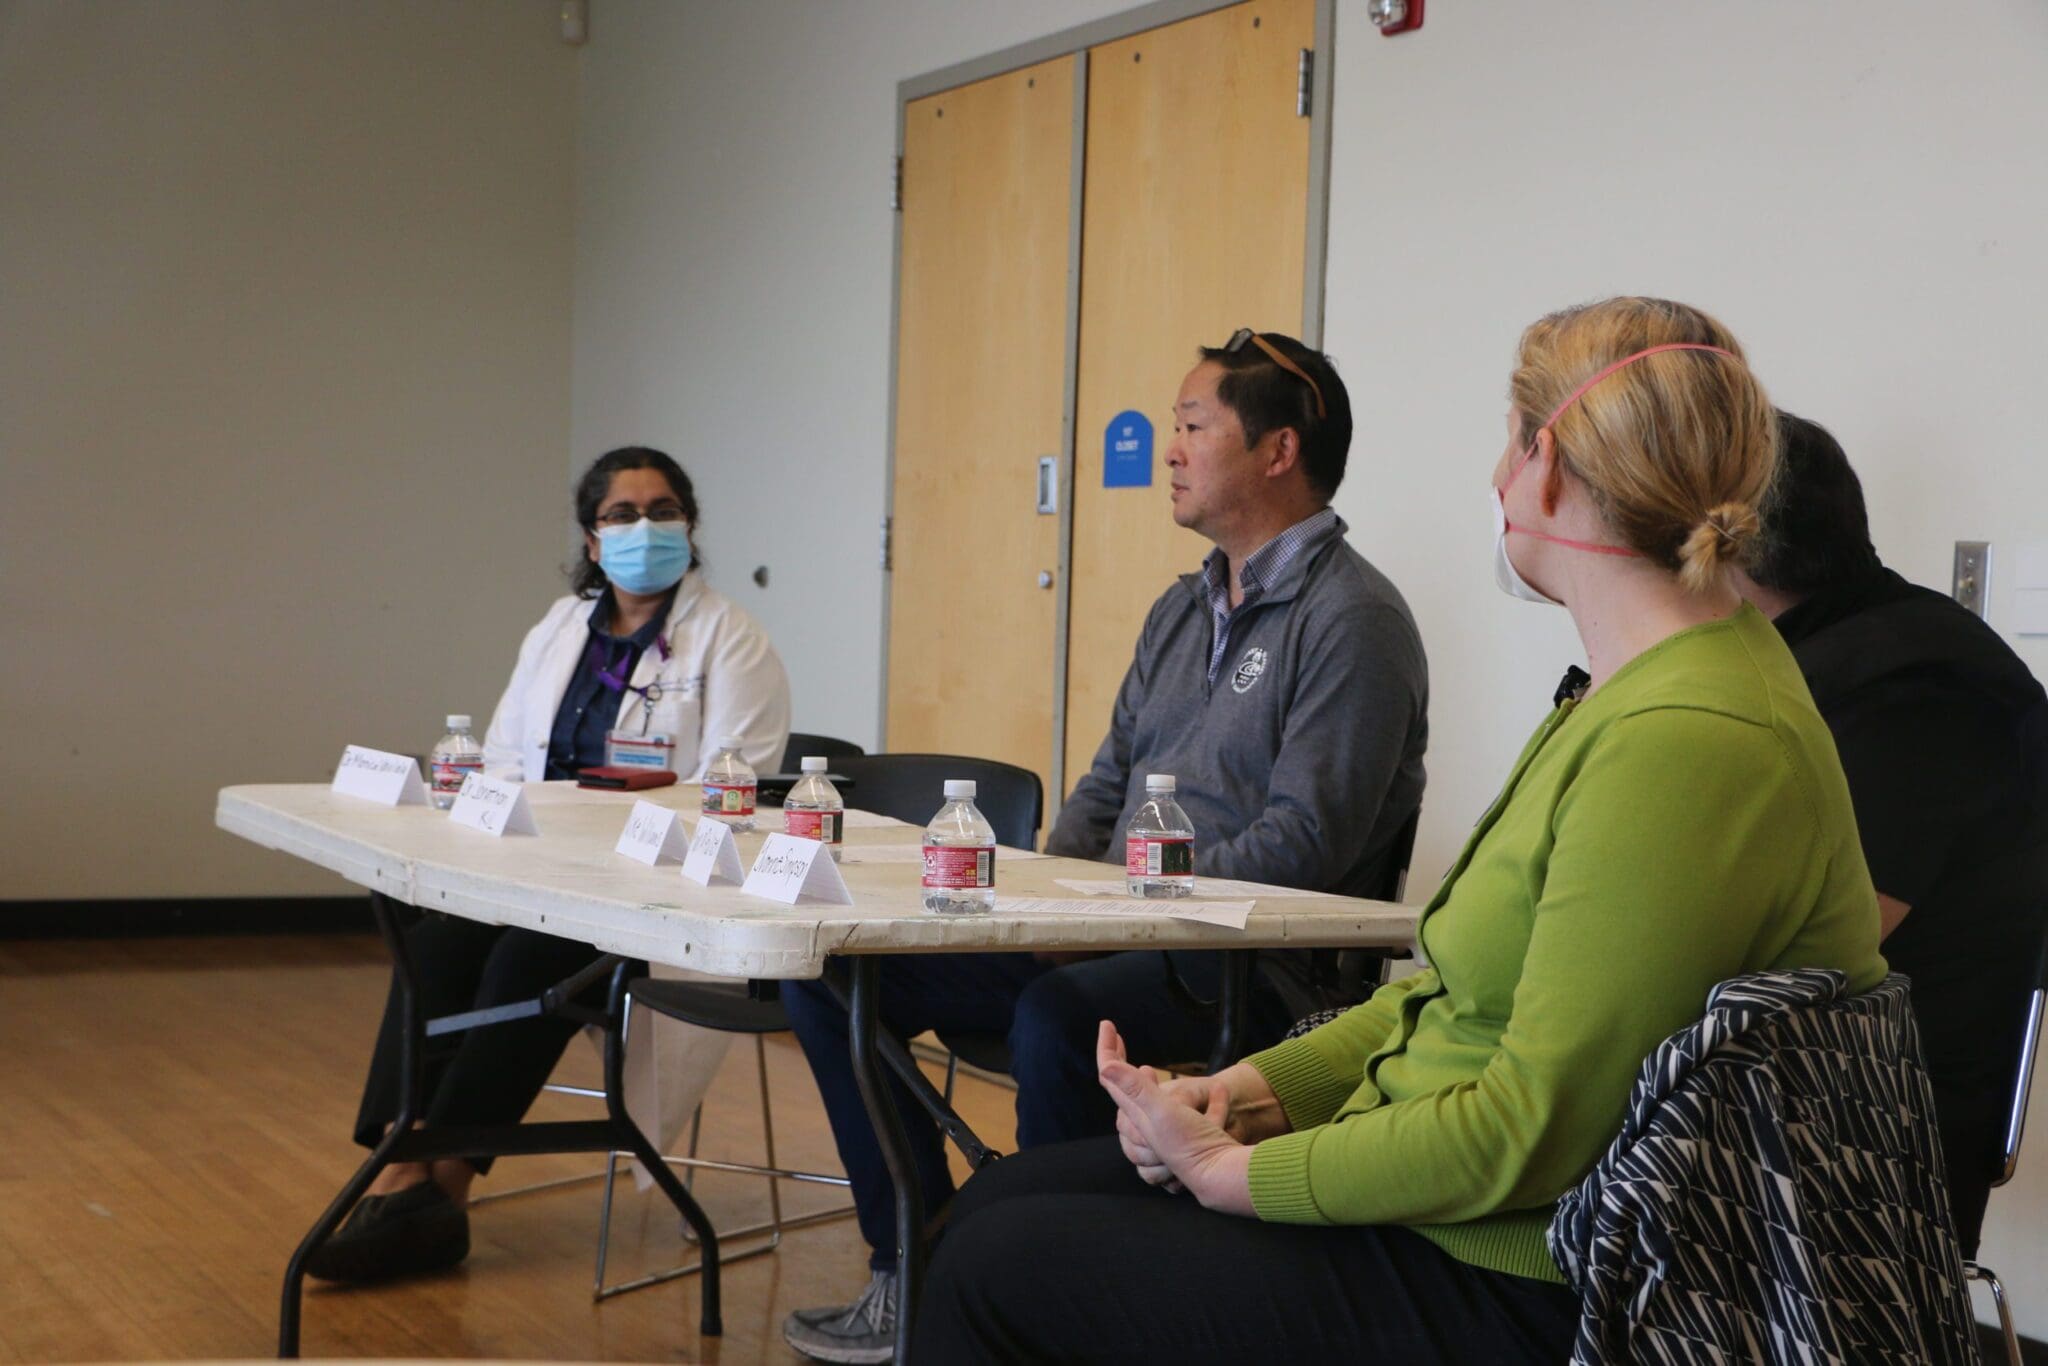 Health Occupation Students of America visit with HIPRC